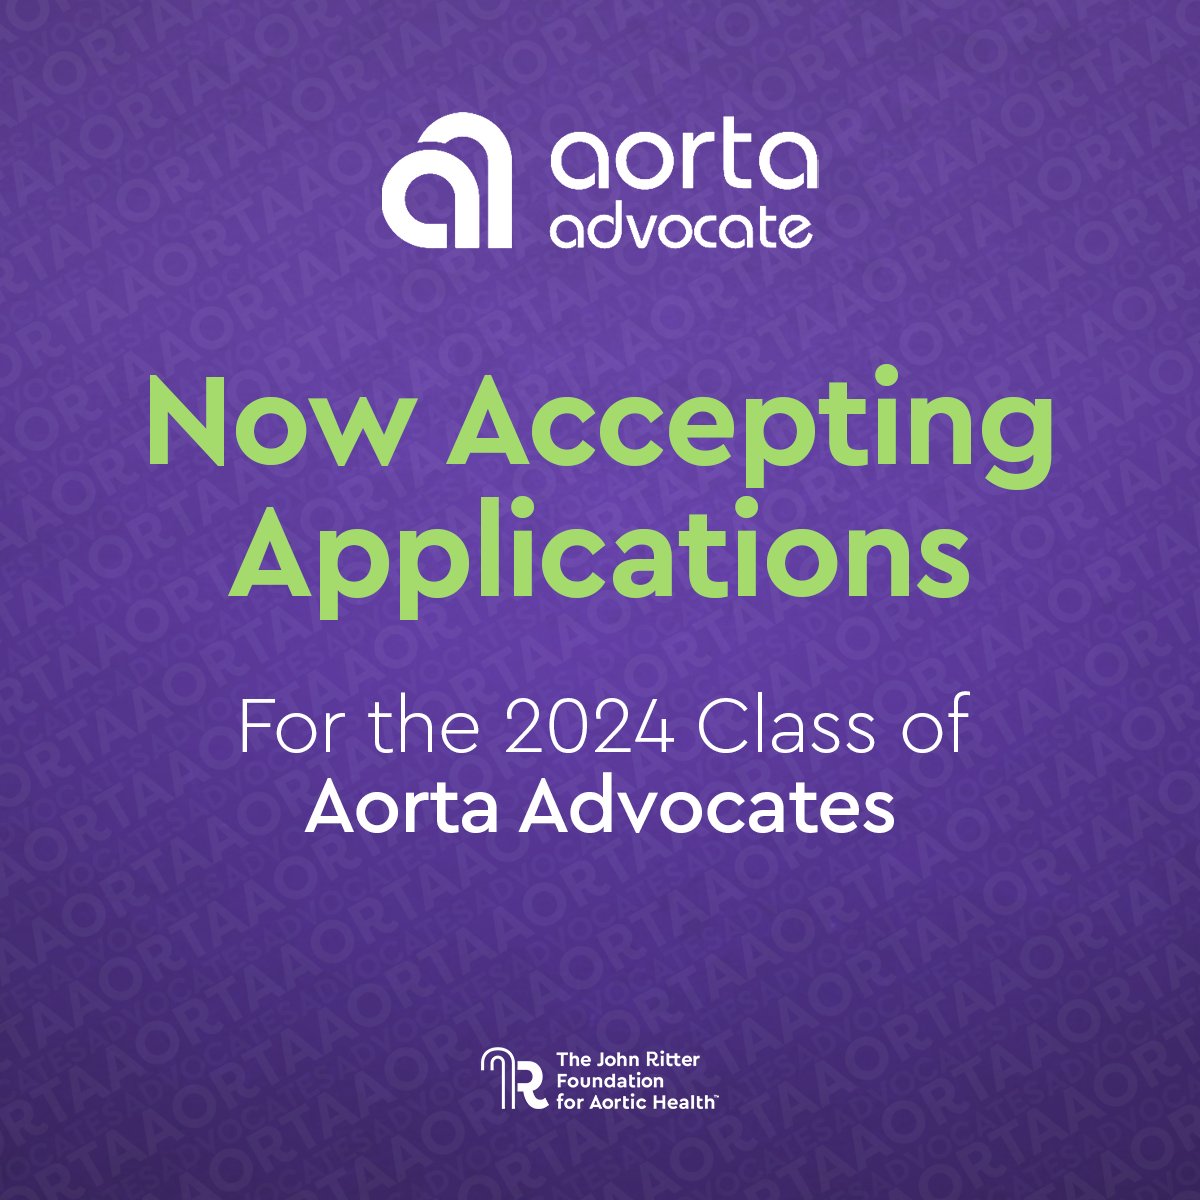 REMINDER: THE DEADLINE TO APPLY TO BECOME AN AORTA ADVOCATE IS THURSDAY, FEBRUARY 29, 2024. Aorta Advocates are trained volunteers who have personal experience with thoracic aortic aneurysm and dissection. They provide one on one peer support. Apply here. johnritterfoundation.org/advocate-appli…